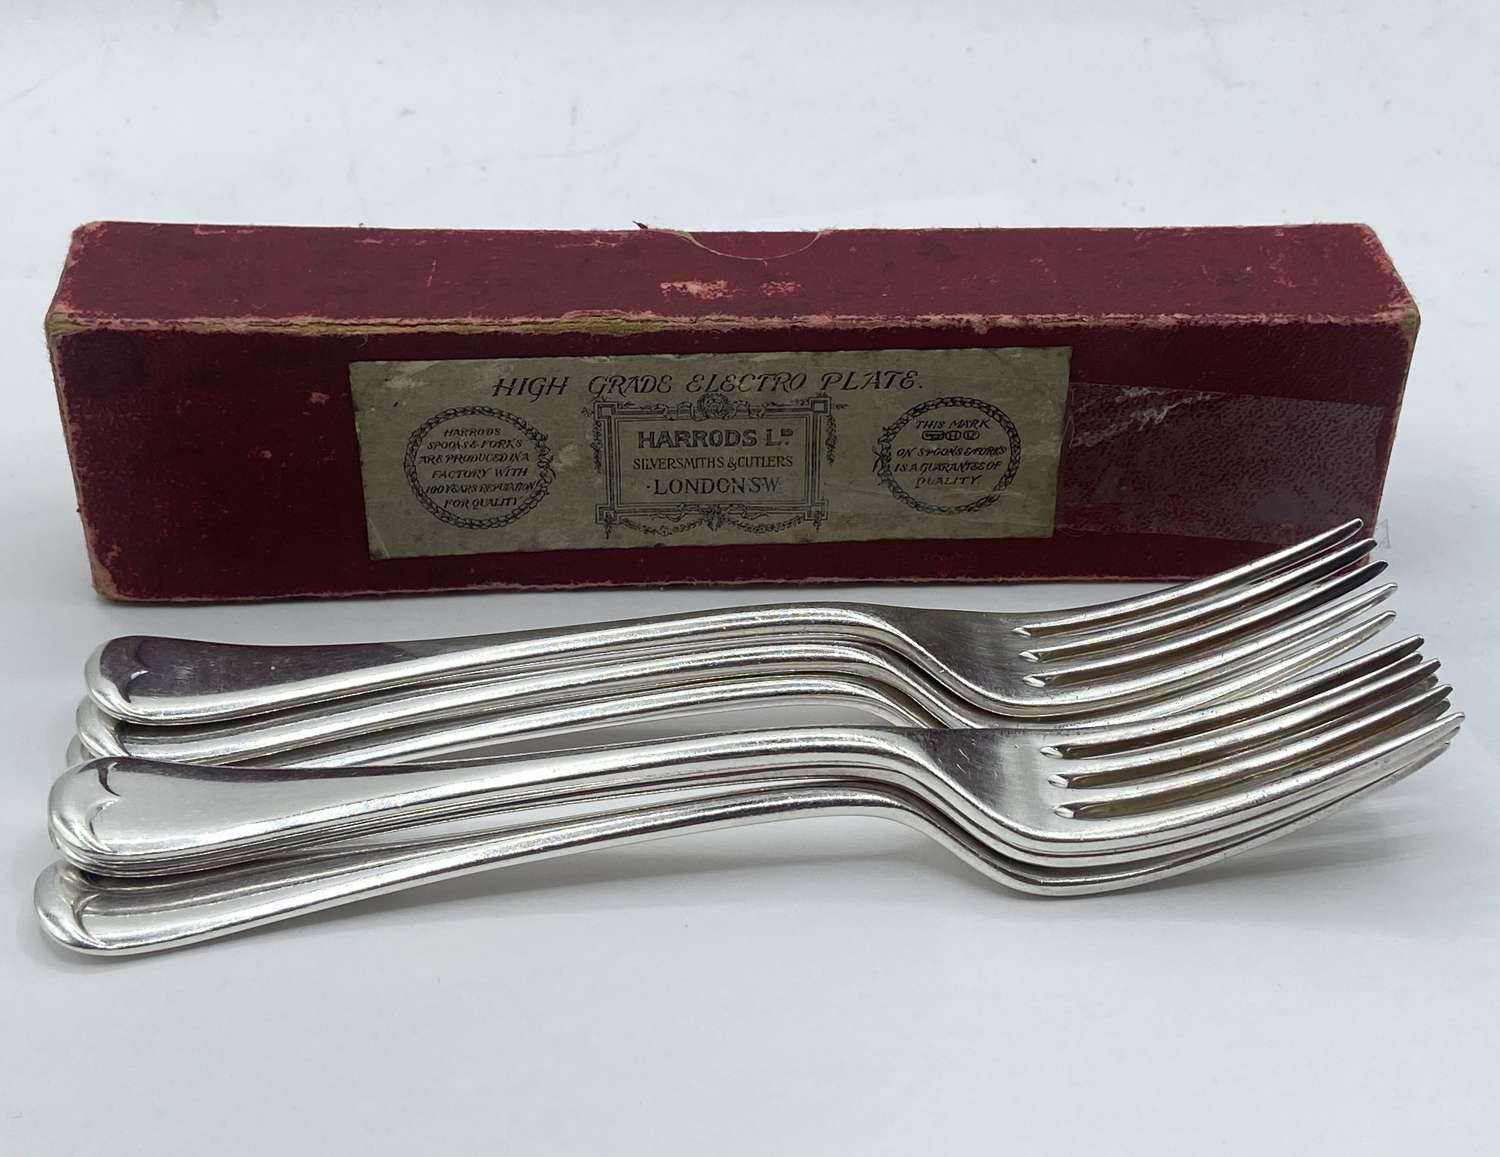 Antique Boxed Old English Desert Forks Harrods Ld Silversmith & Cutler